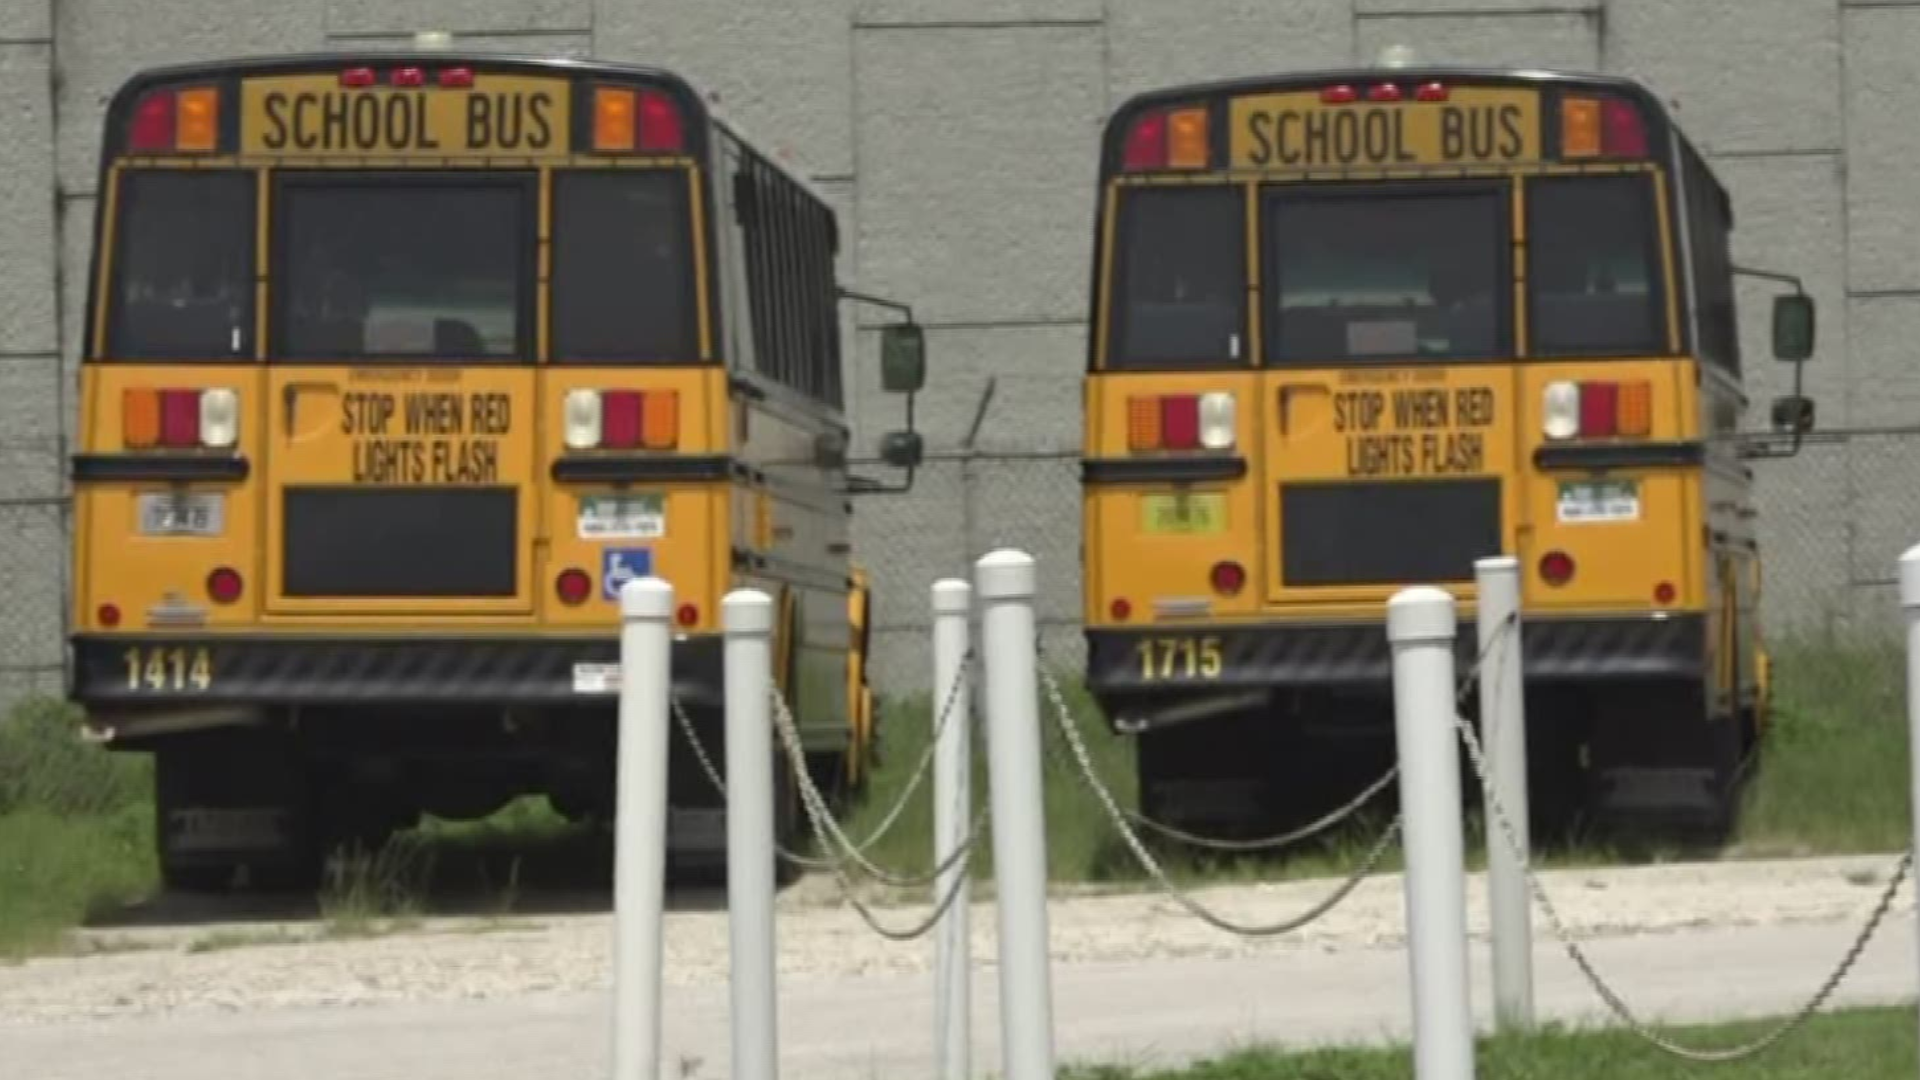 School in Polk County may be starting 15 minutes later, but buses are going to be picking kids up at the same time. The hope is to prevent students from being dropped off at school late. But for many families, it's not just one student's schedule that they have to worry about.